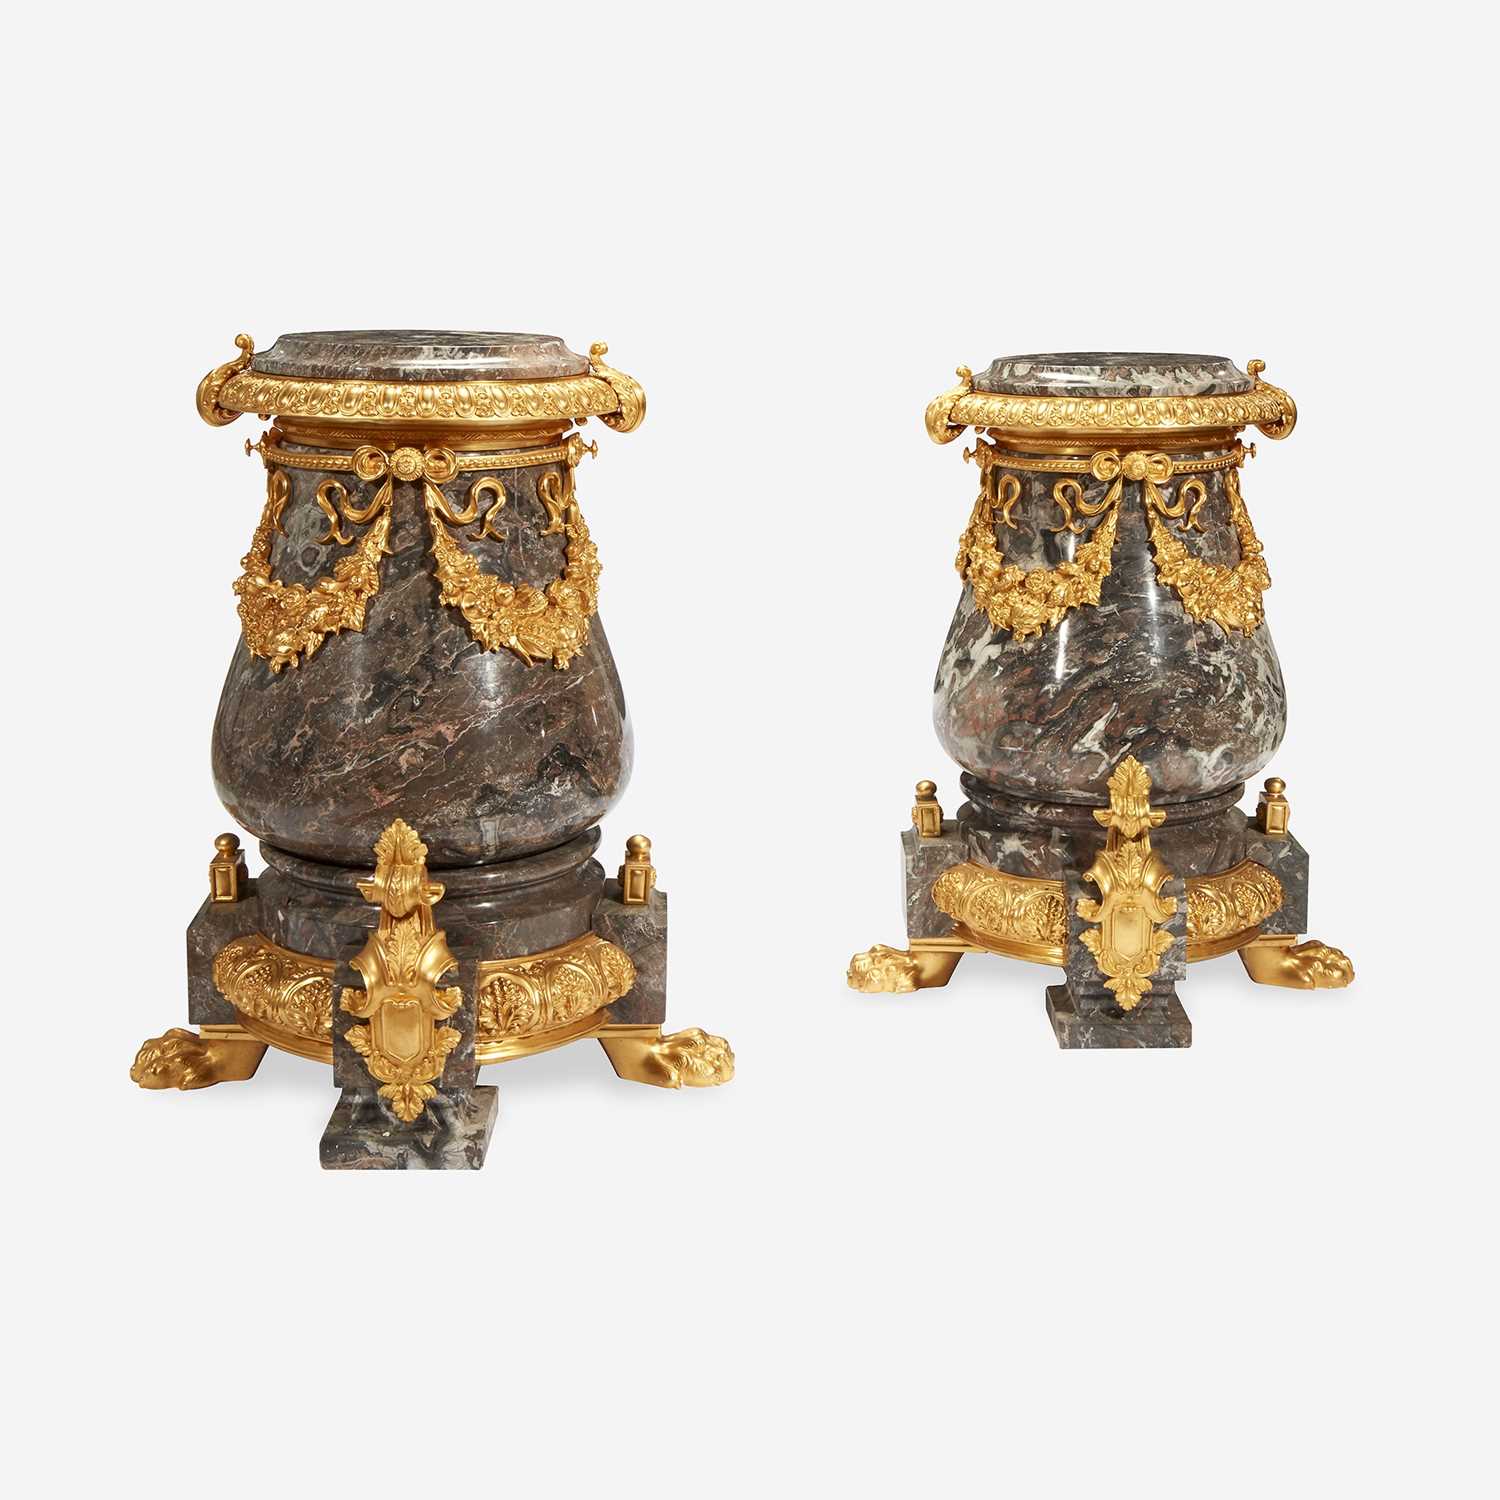 Lot 13 - A Pair of Gilt Metal Mounted Variegated Gray Marble Pedestals